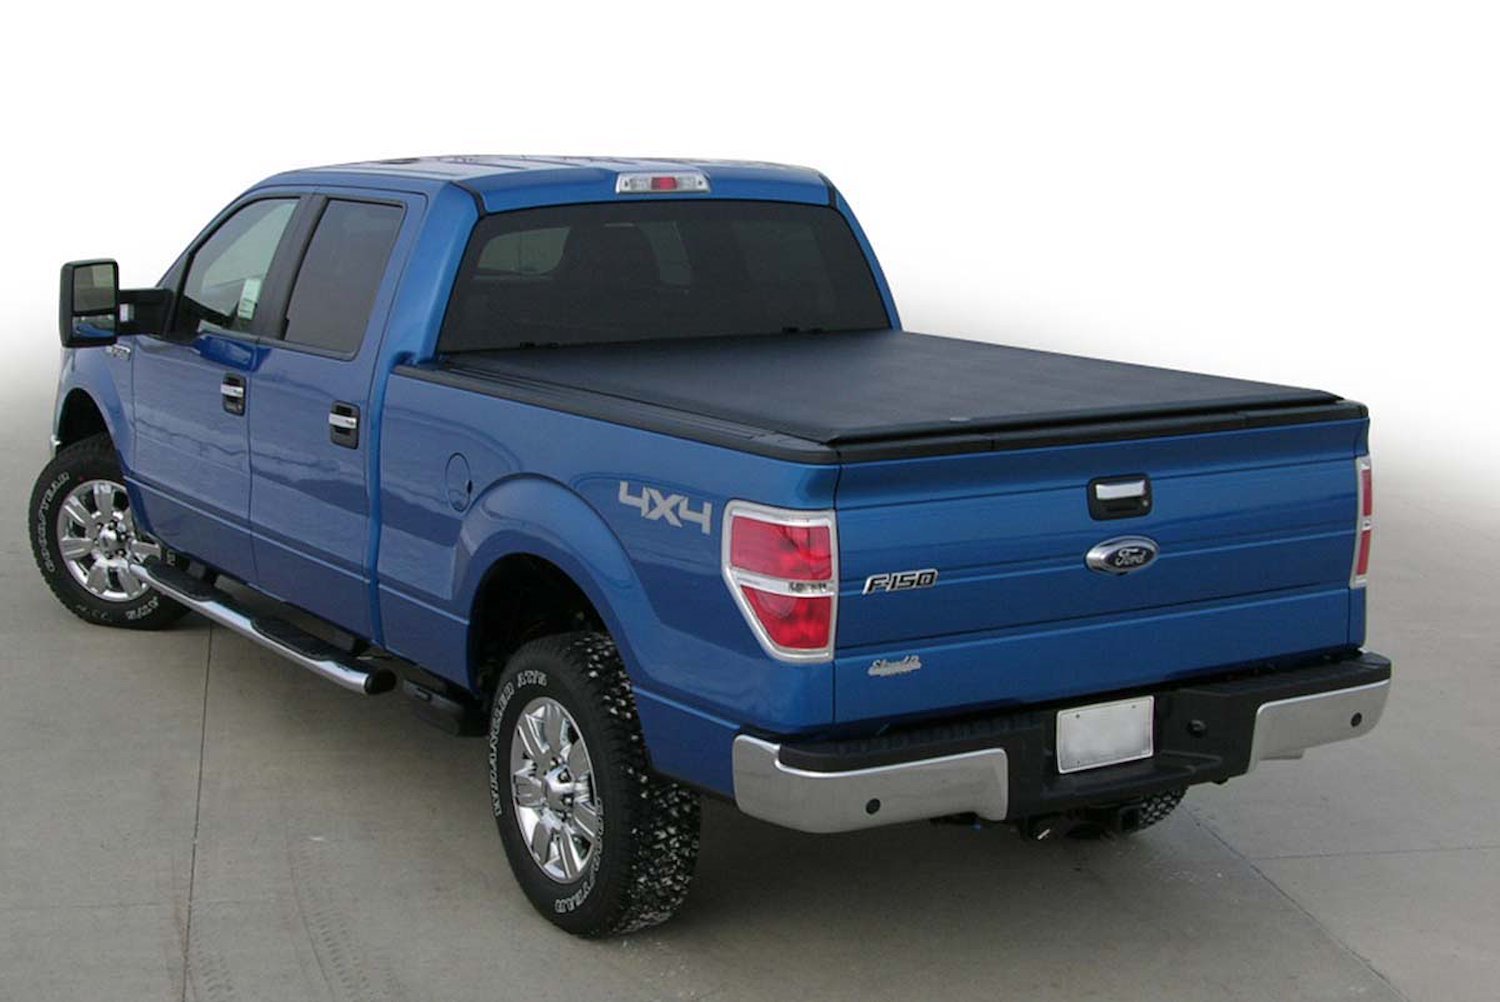 LORADO Roll-Up Tonneau Cover, Fits Select Ford F-150,